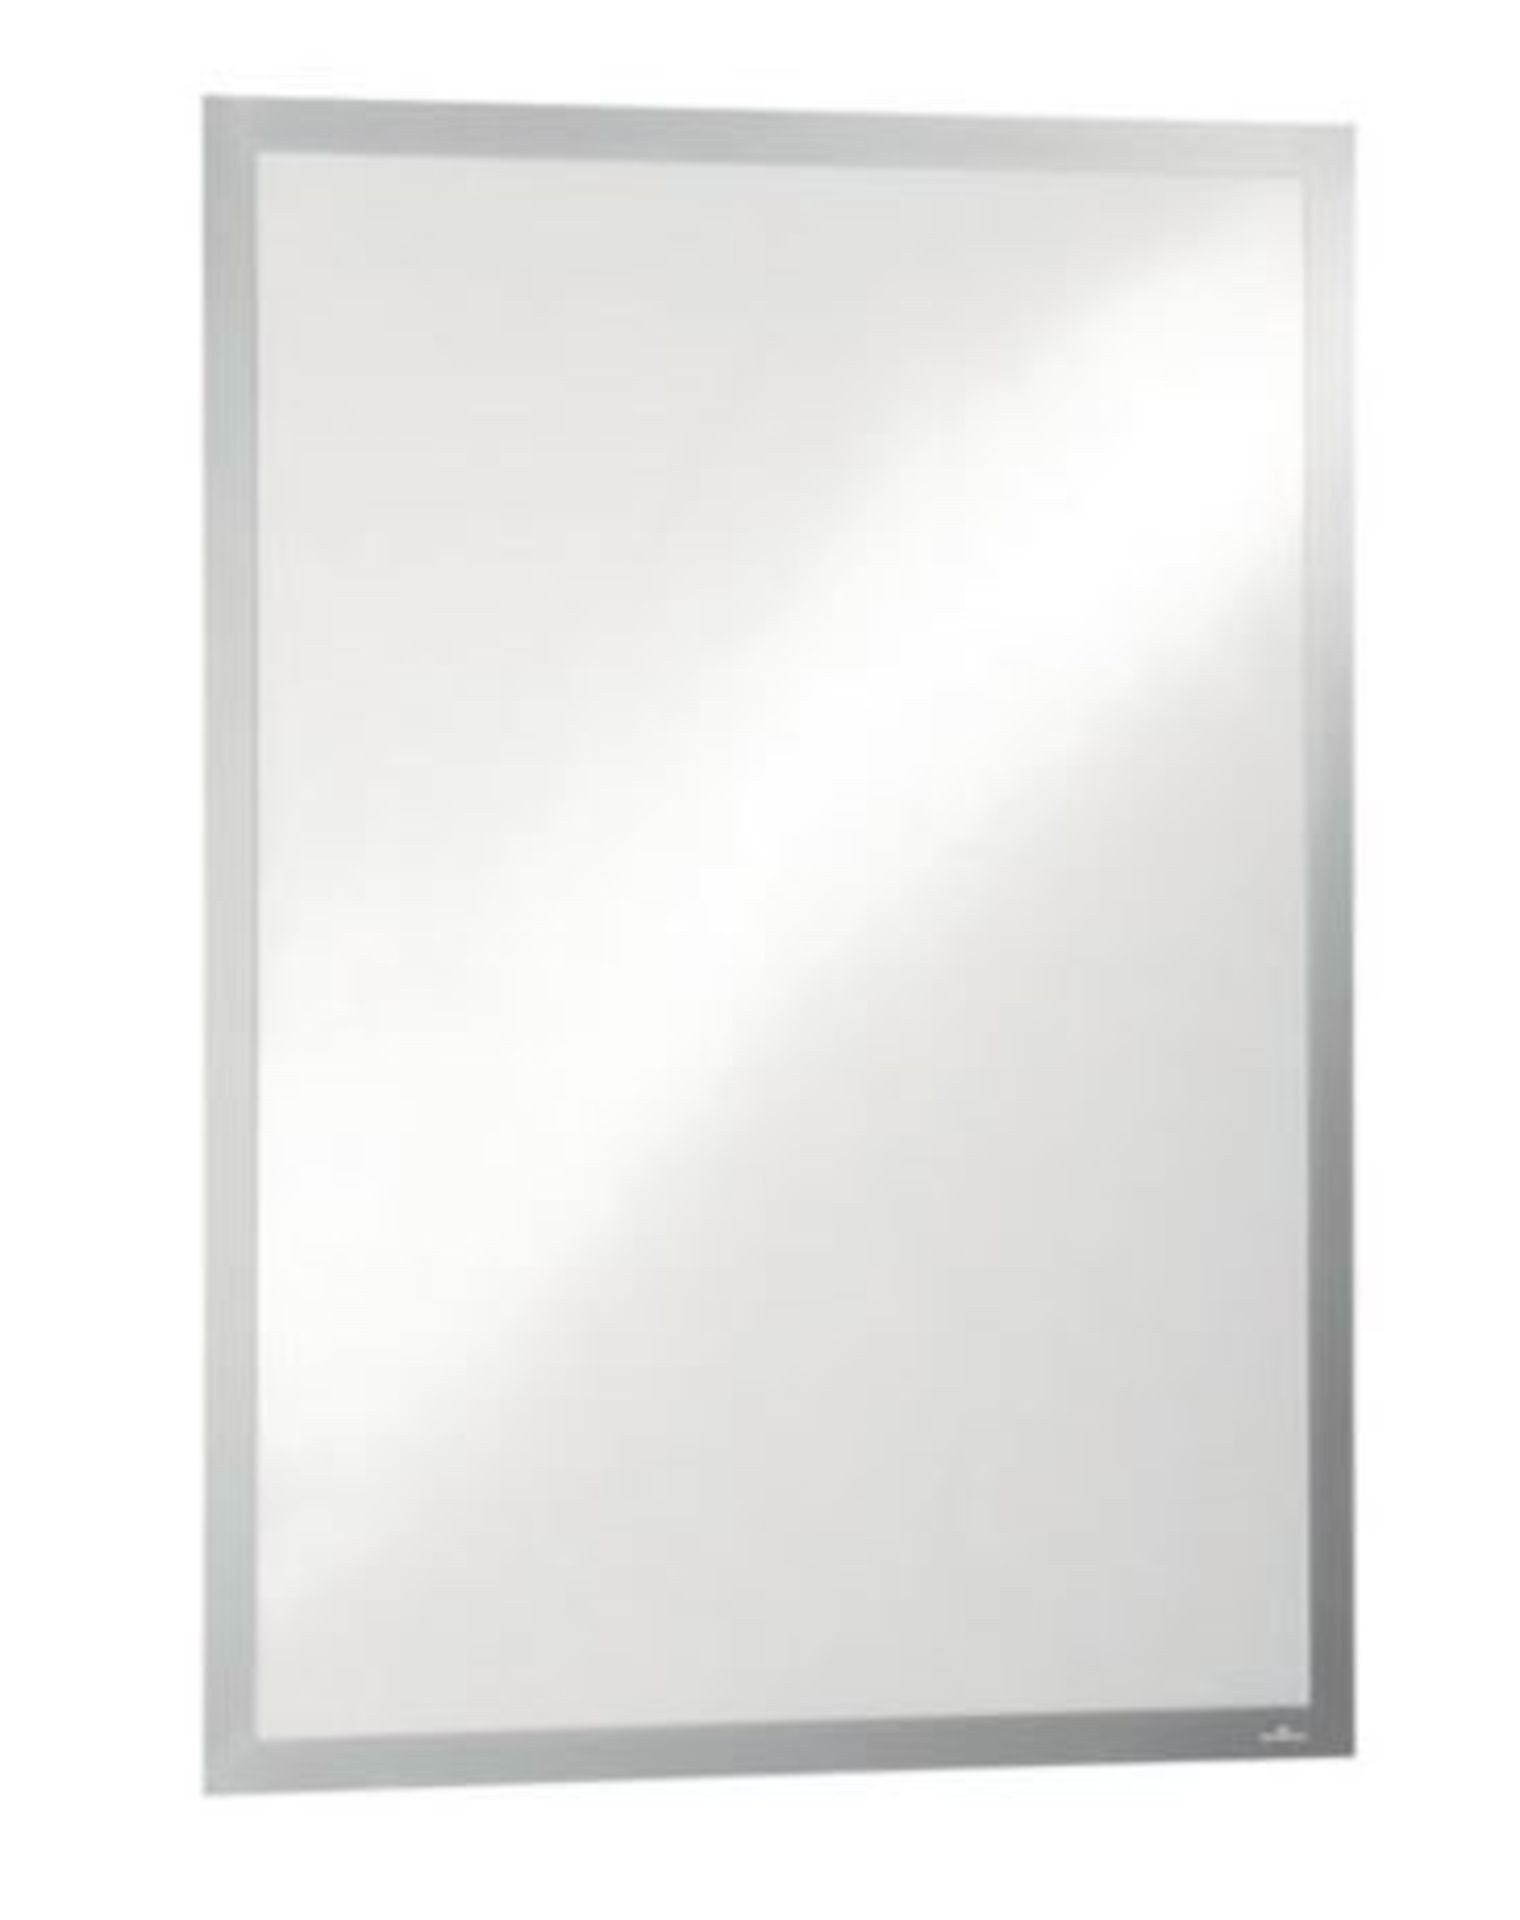 1 LOT TO CONTAIN 2 DURAFRAME SELF ADHESIVE MAGNETIC POSTER FRAMES IN METALLIC SILVER / SIZE: 50X70CM